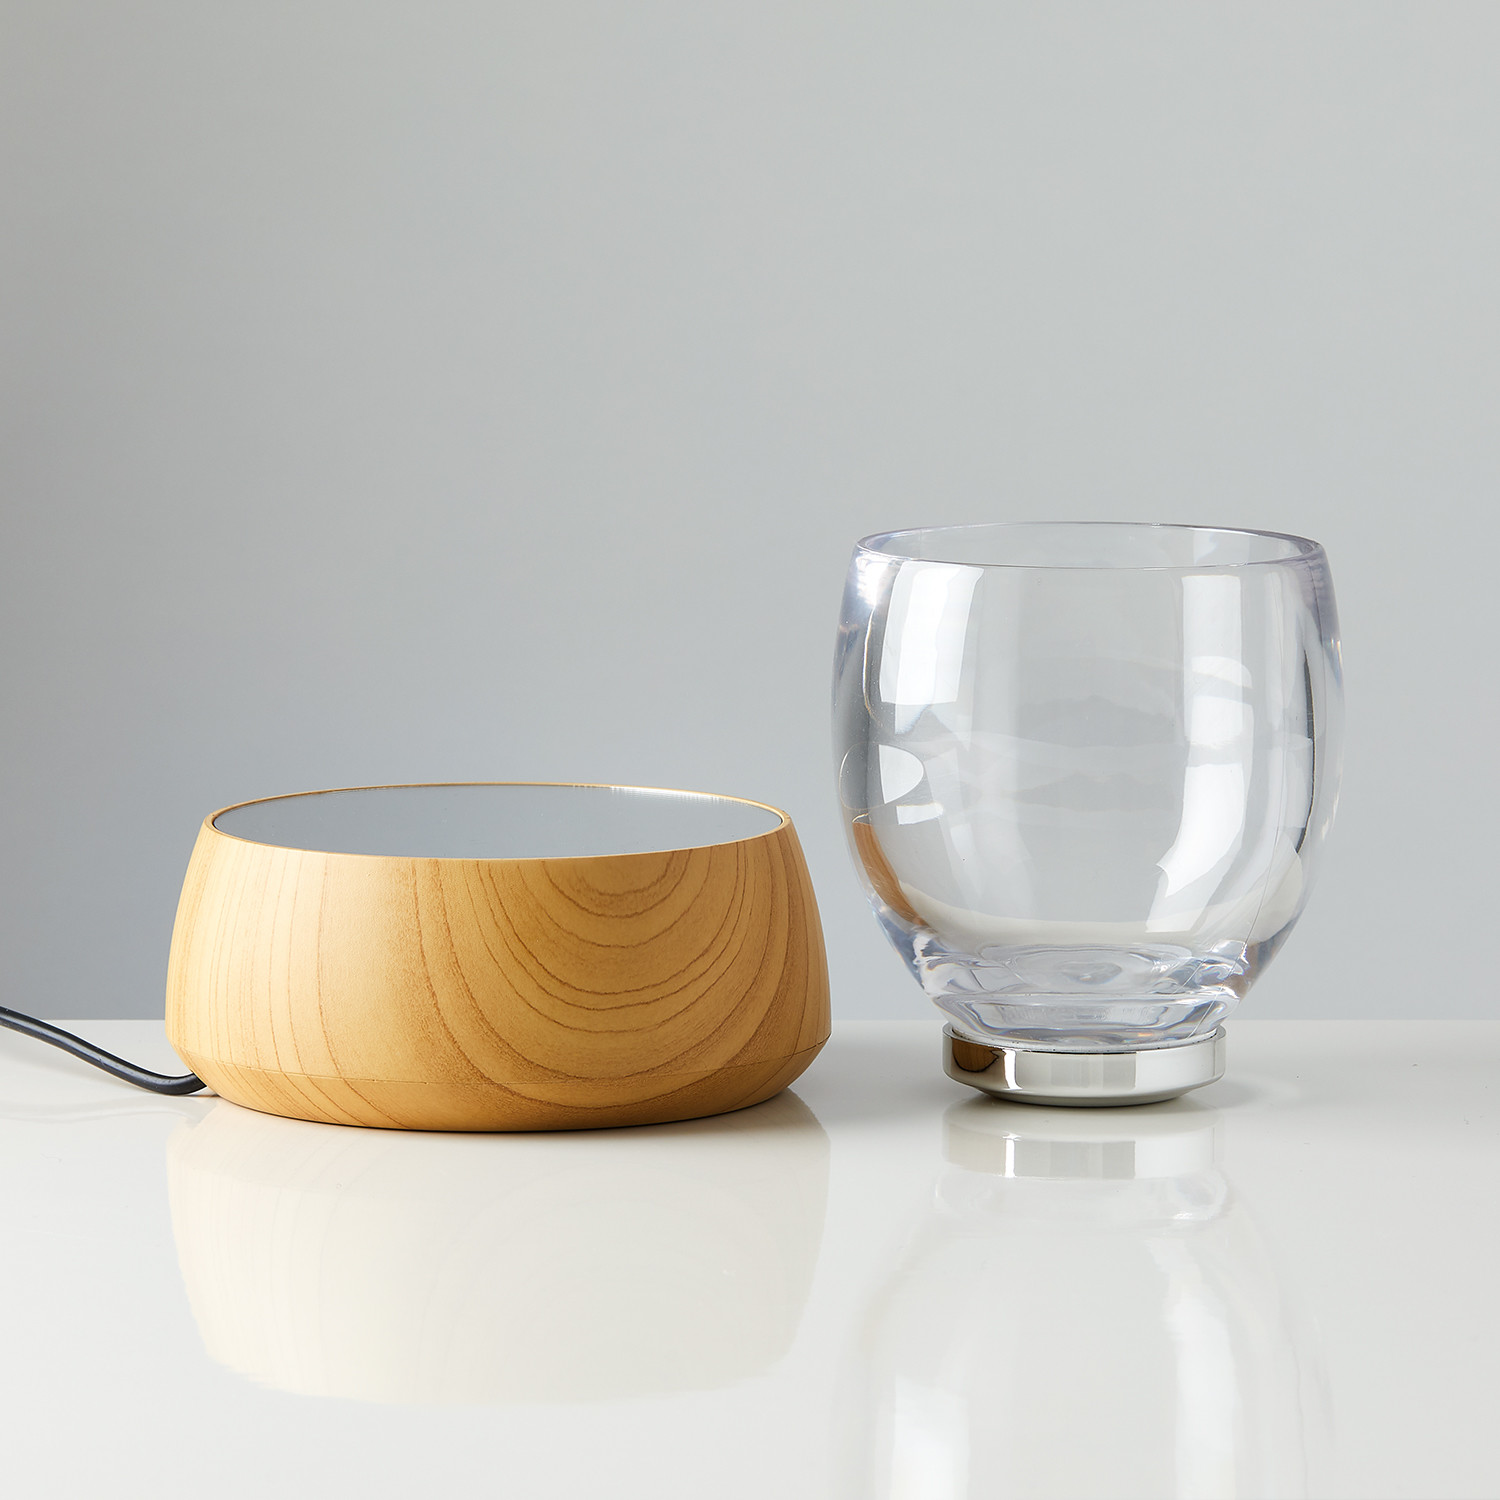 LevitatingX by Cogidea Levitating Cup Collection